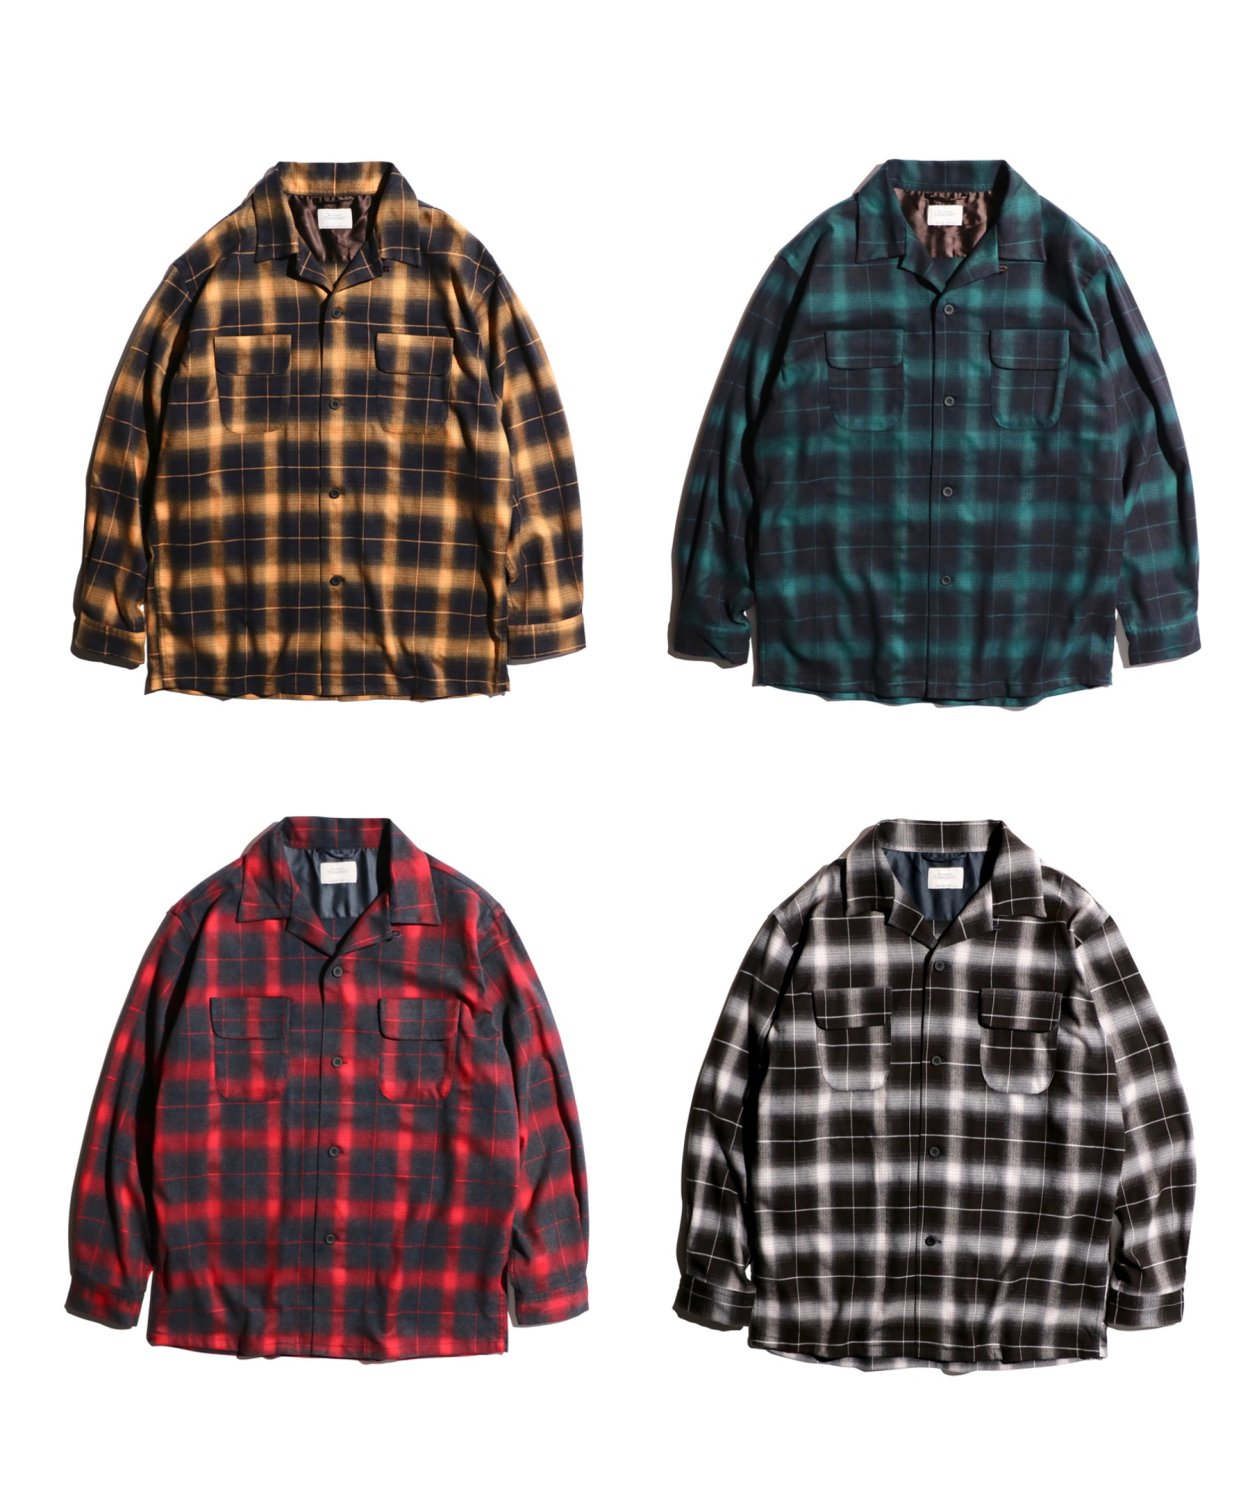 TOWN CRAFT/タウンクラフト OMBRE W-FLAP 50S SHIRTS オンブレ50S 